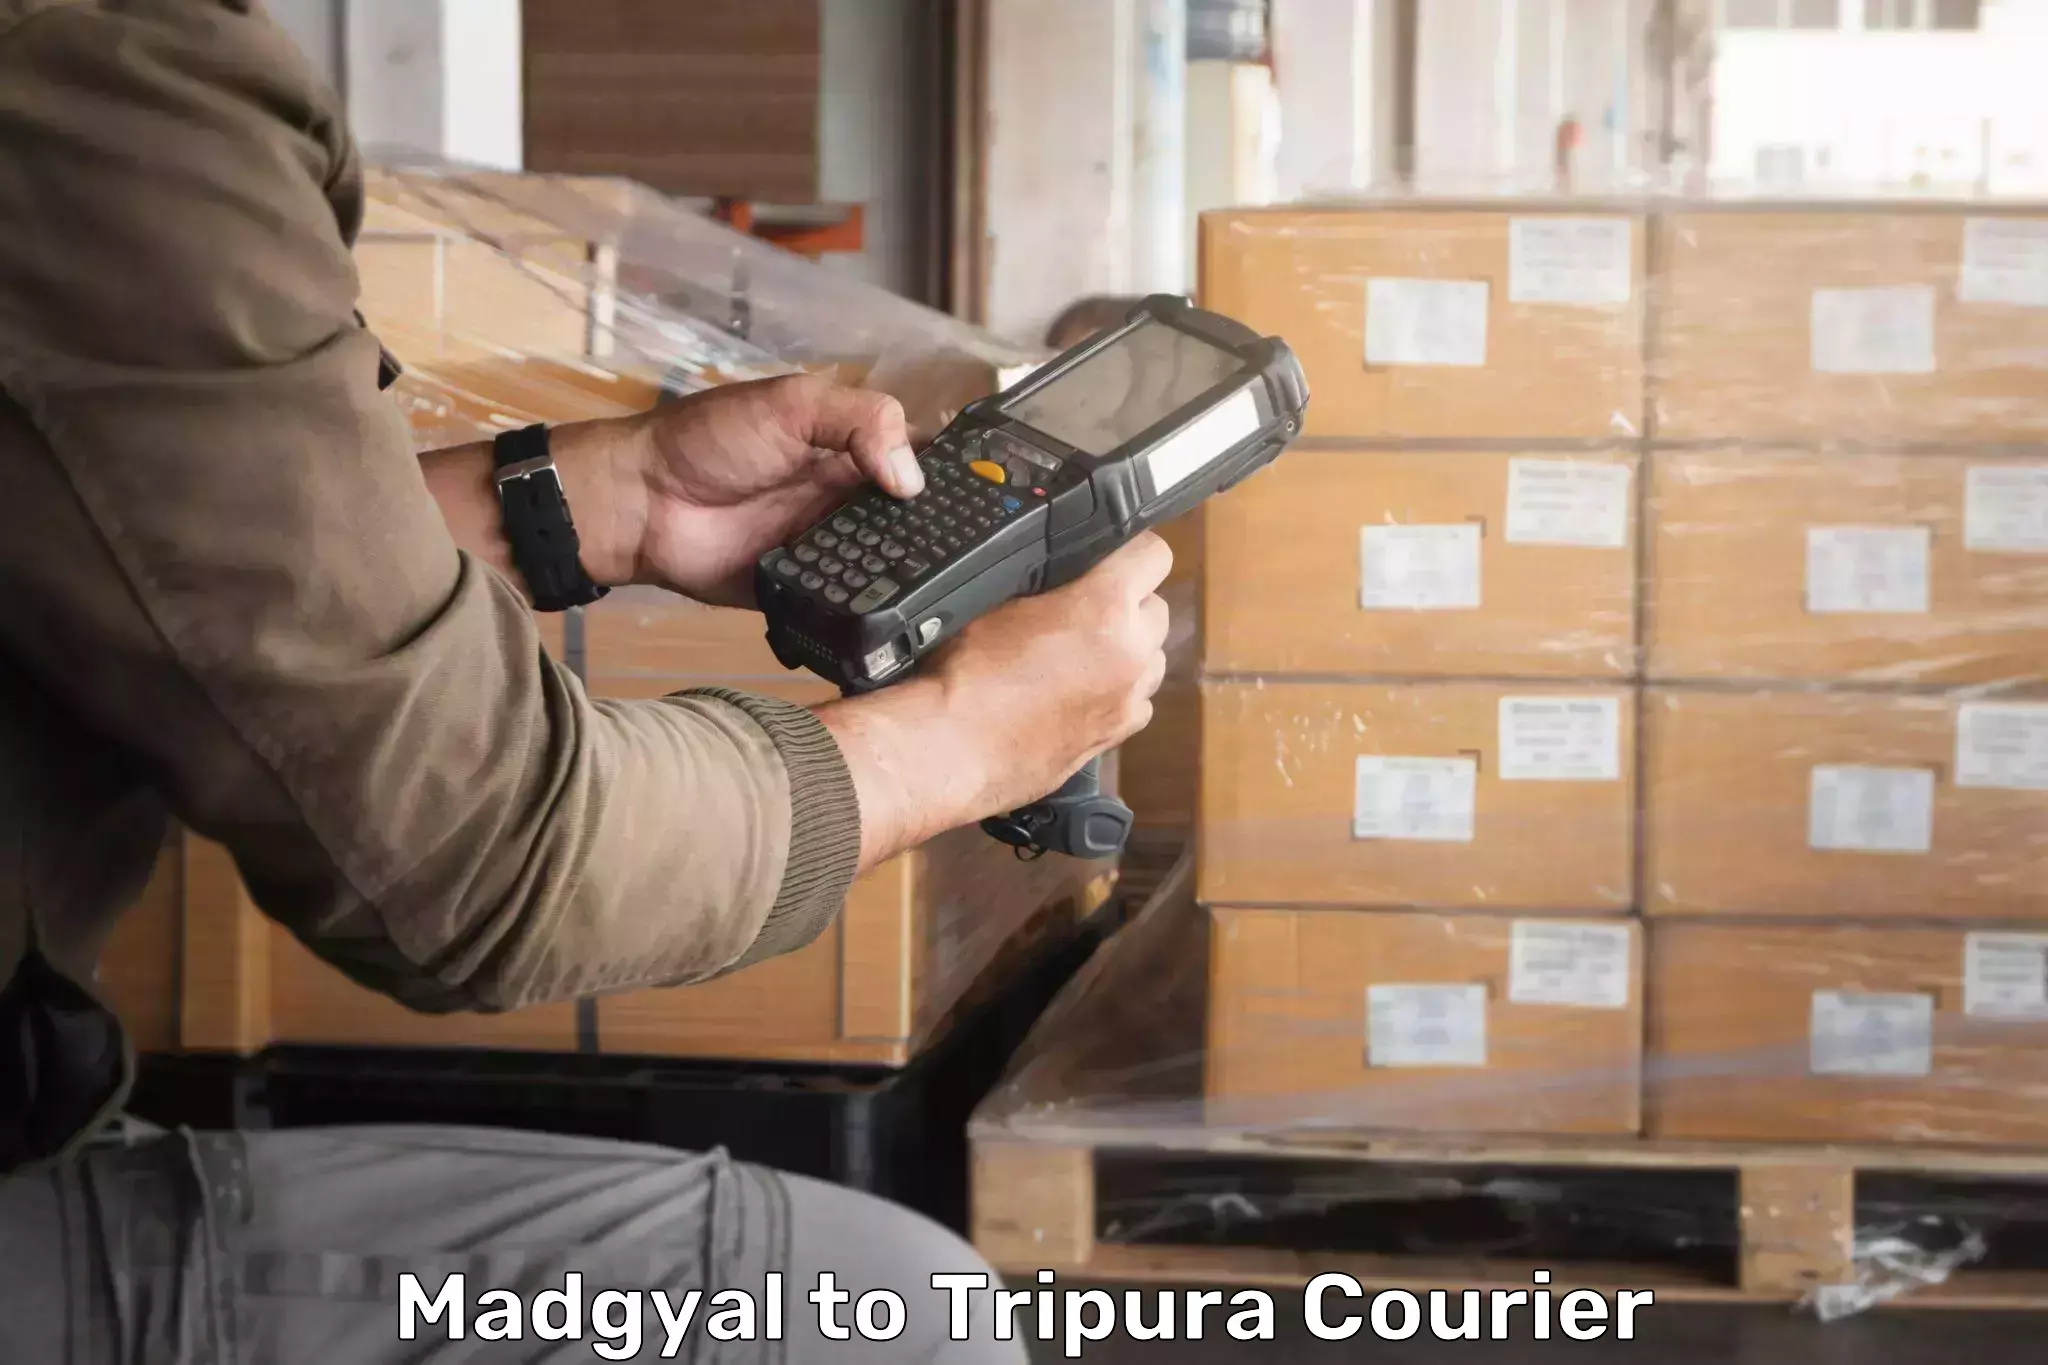 Courier service comparison Madgyal to Manughat